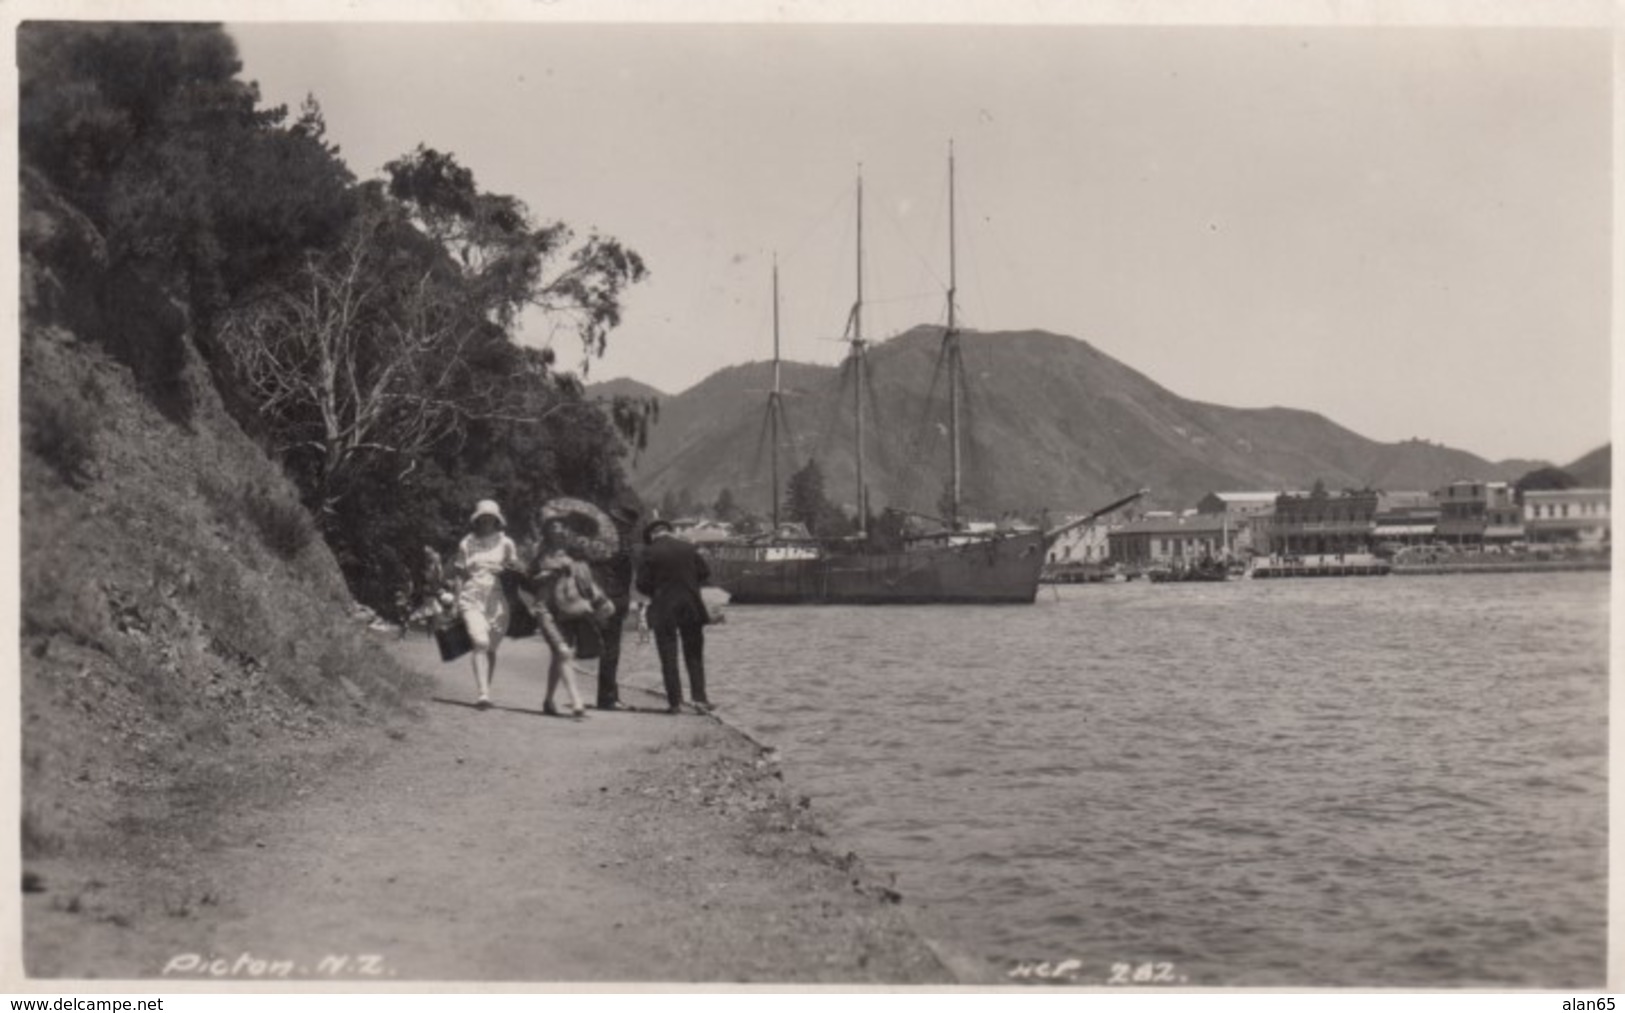 Picton New Zealand, People Walk Along Path At Shore, Harbour Ship, C1910s Vintage Real Photo Postcard - New Zealand